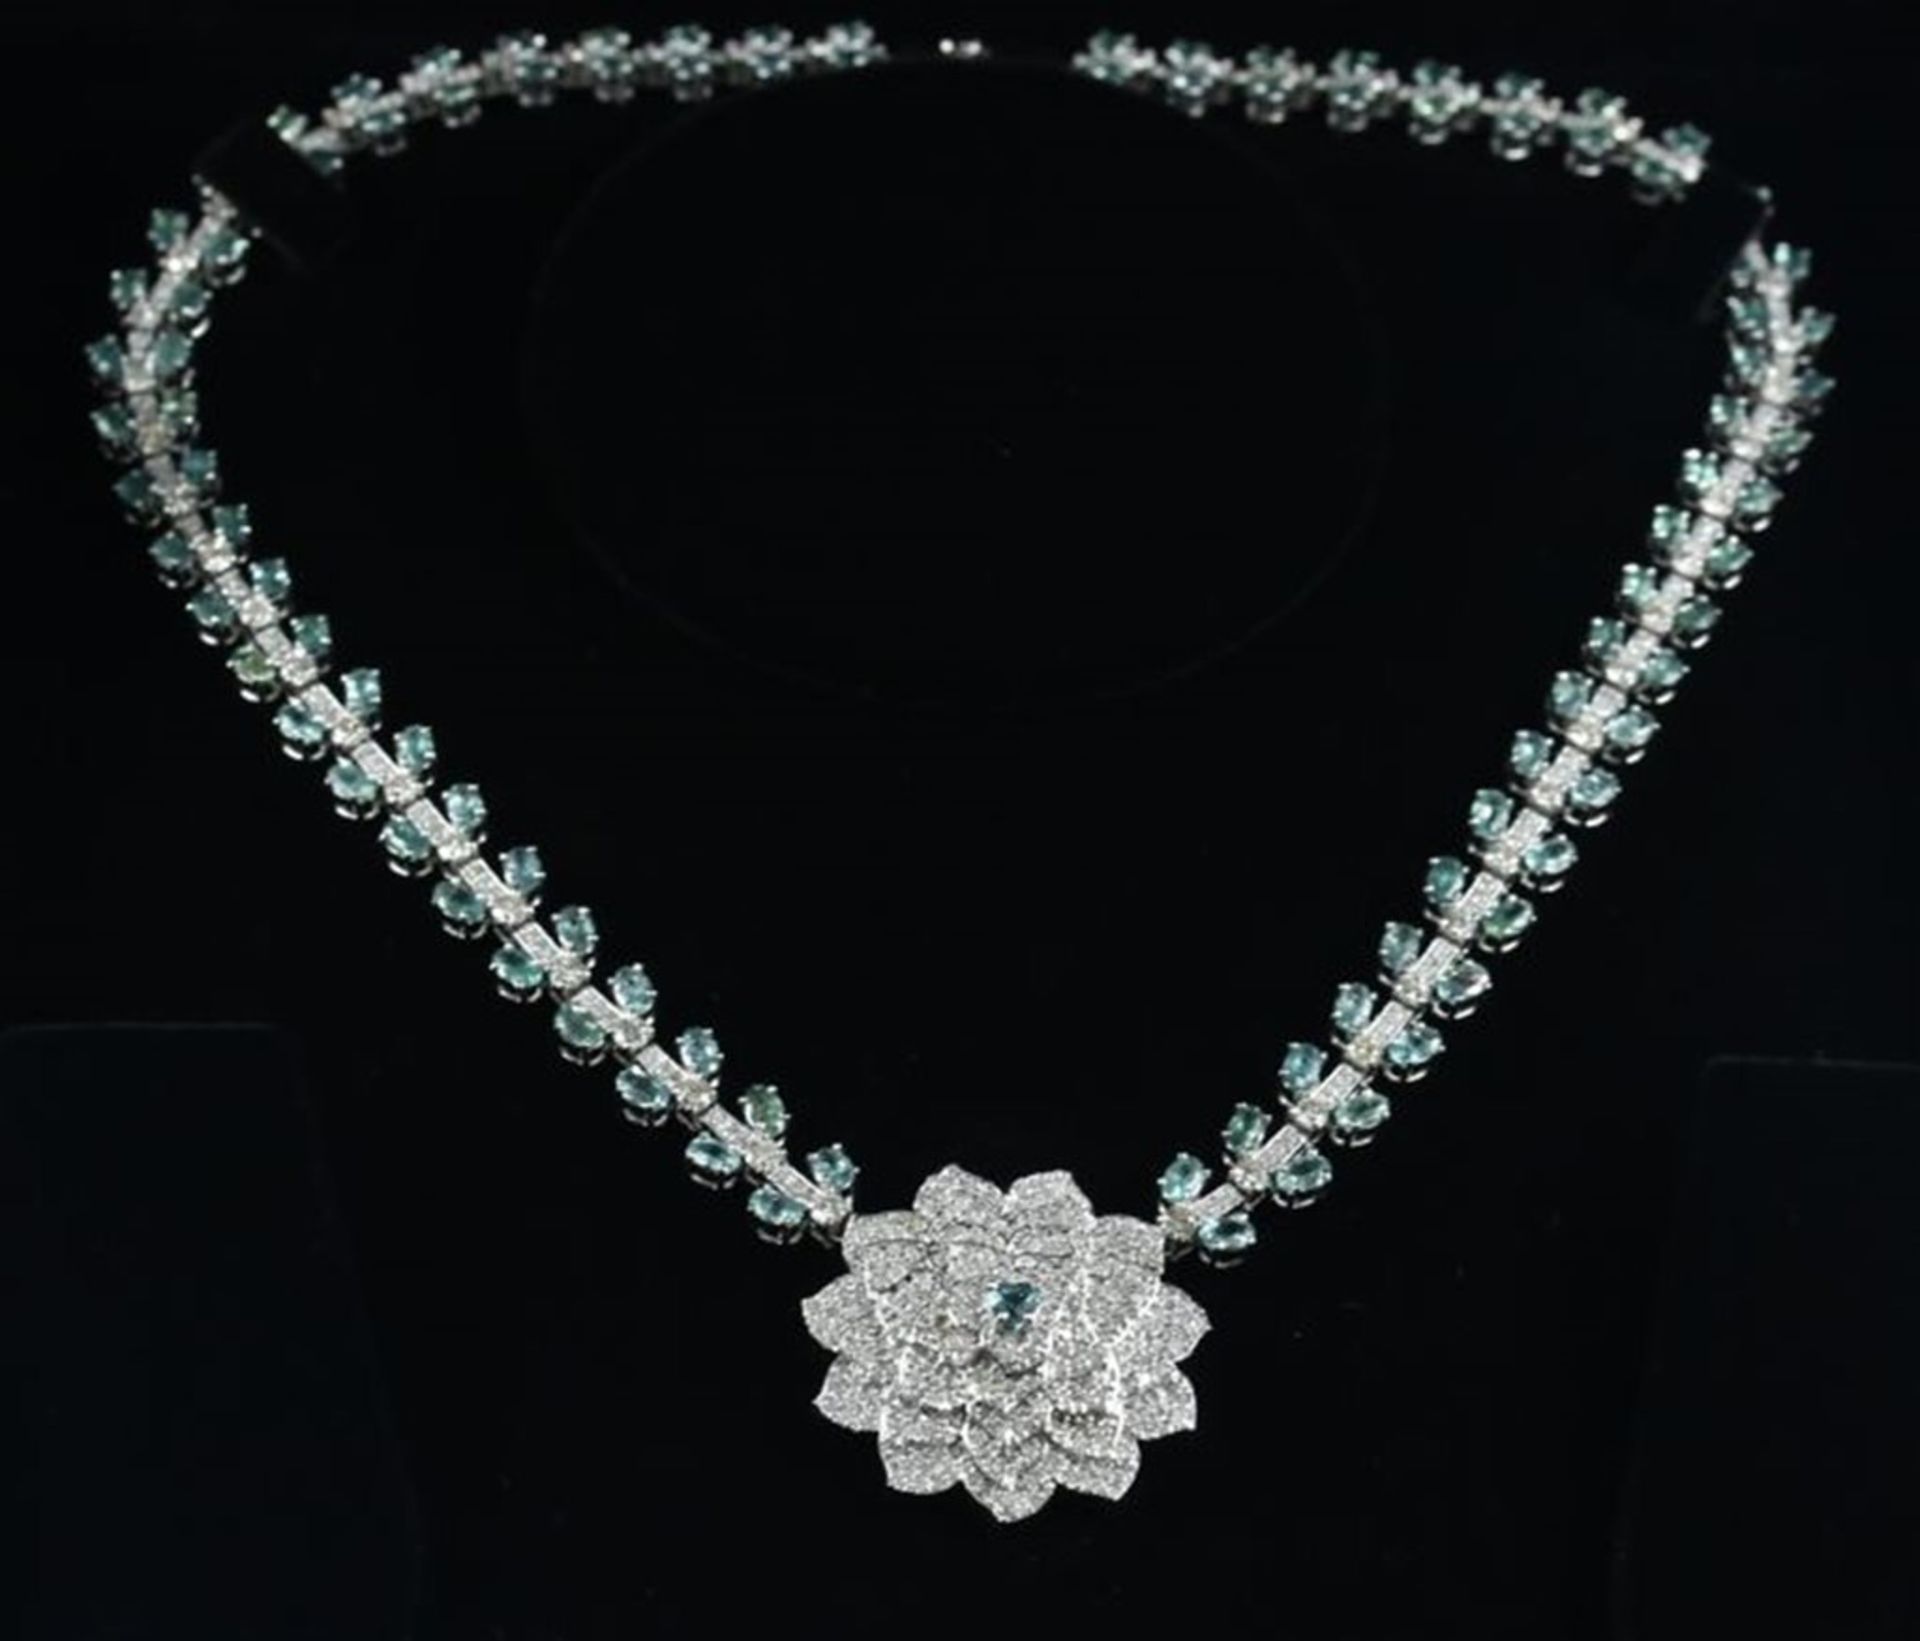 IGI Certified 14 K/ 585 White Gold 22.59 ct. Alexandrite and 14.52 ct. Diamond Necklace - Image 4 of 9